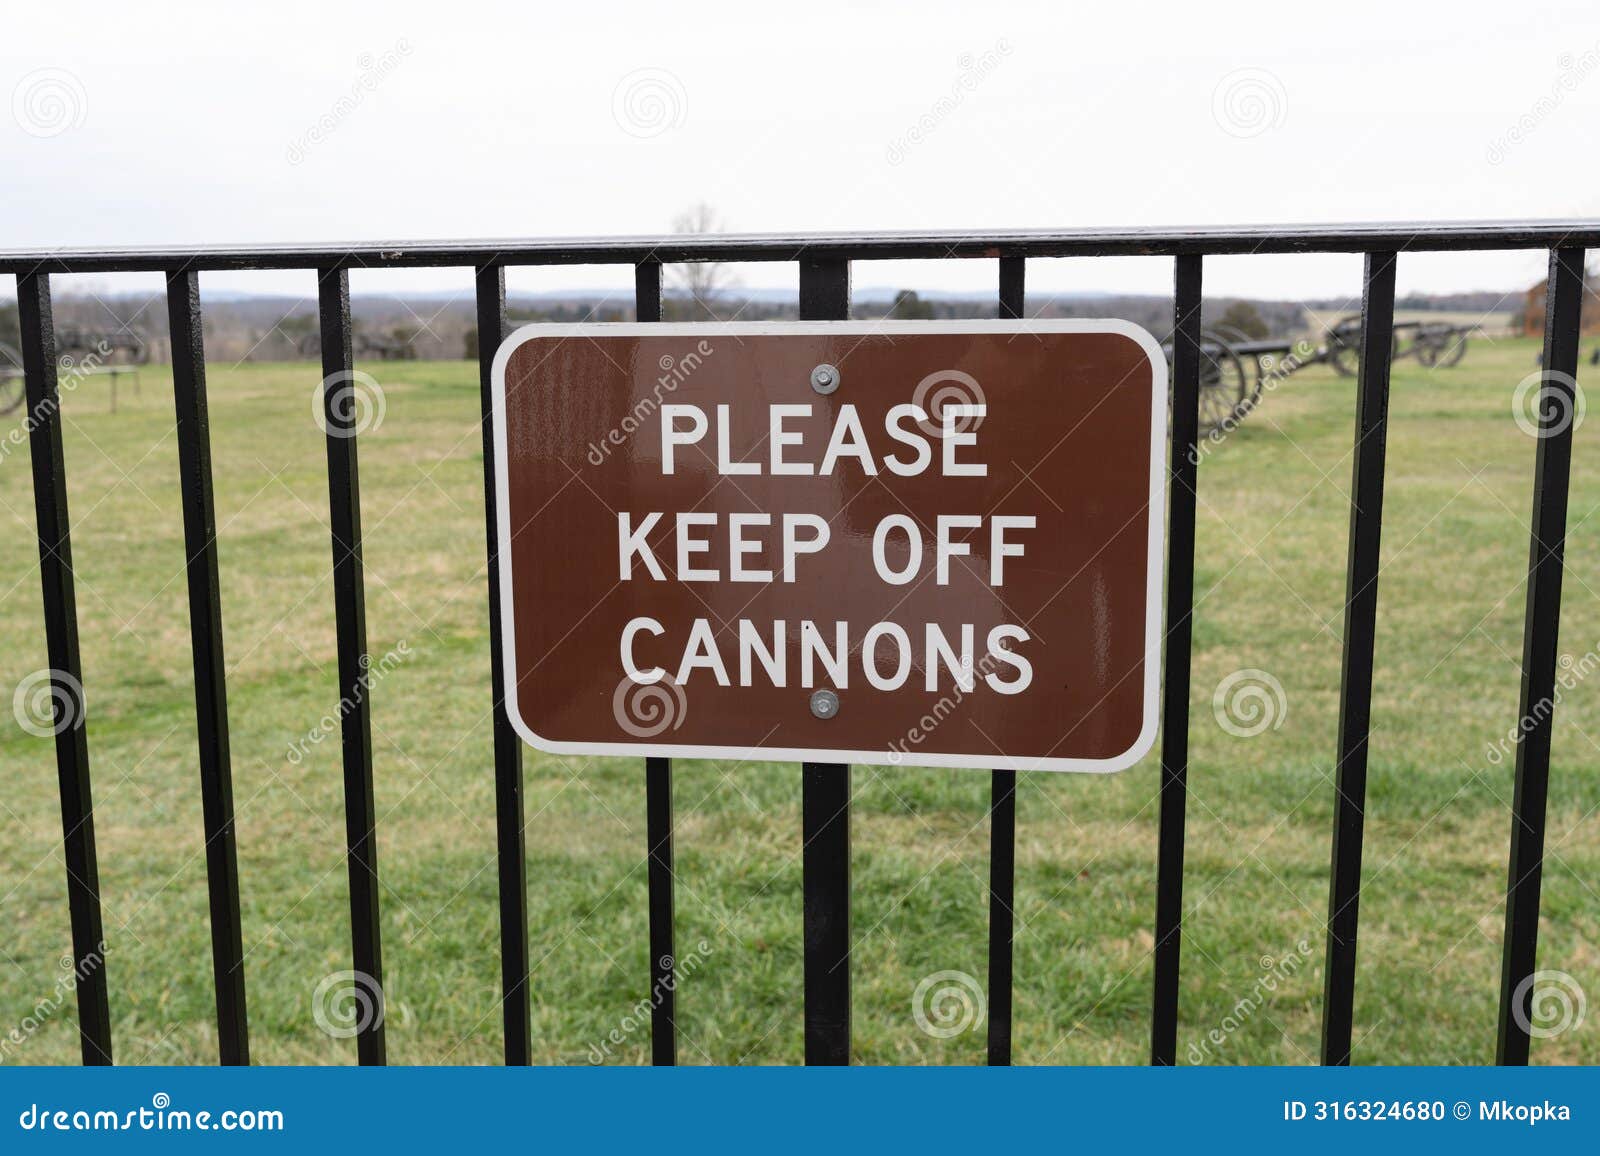 sign to remind visitors to keep off the cannons - manassas battlefield national park